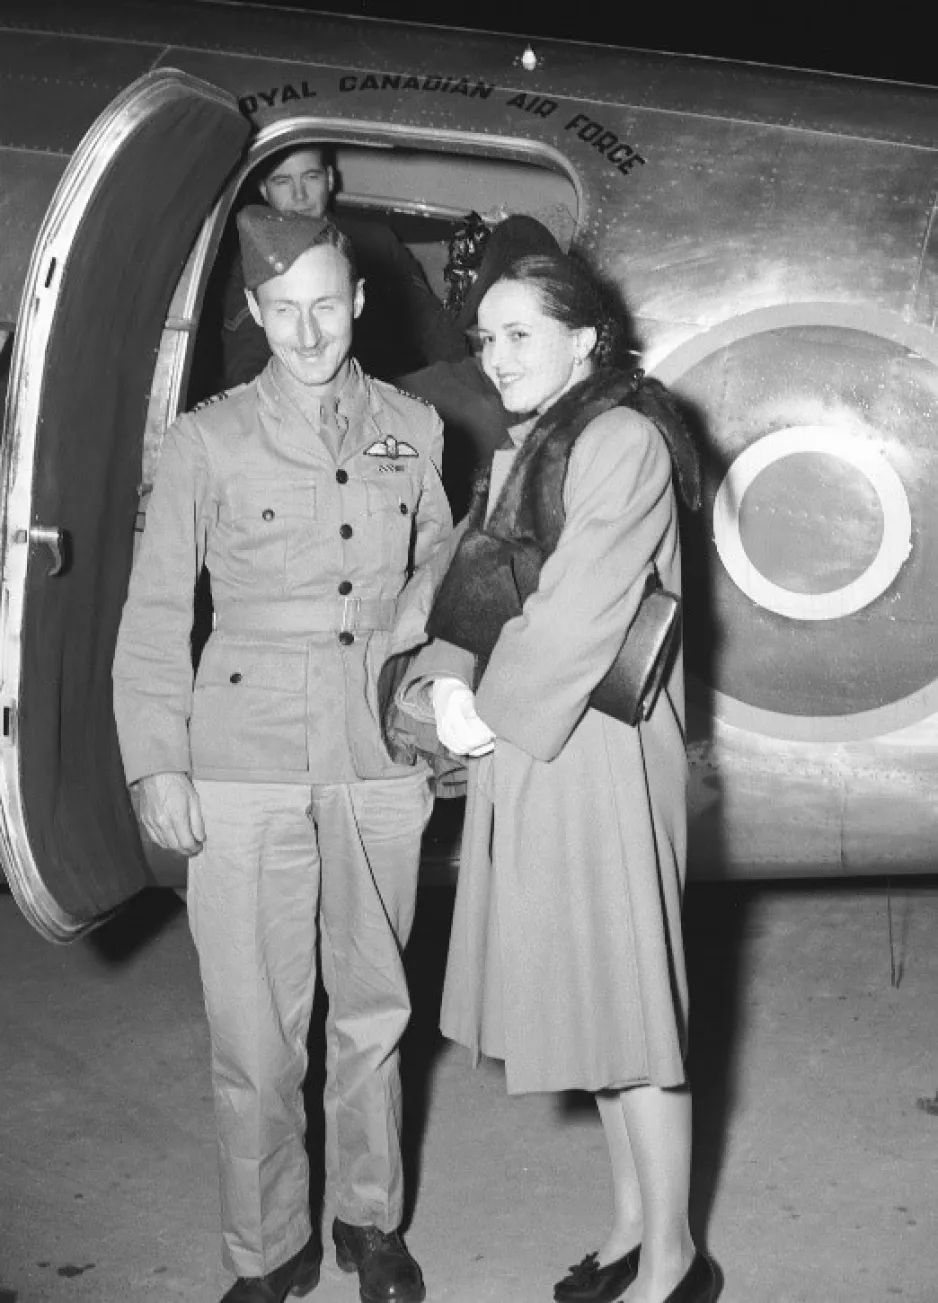 A black-and-white image shows a young man in military uniform standing next to a young woman, wearing dress clothes and high heels. An aircraft behind them reads, “Royal Canadian Air Force.”